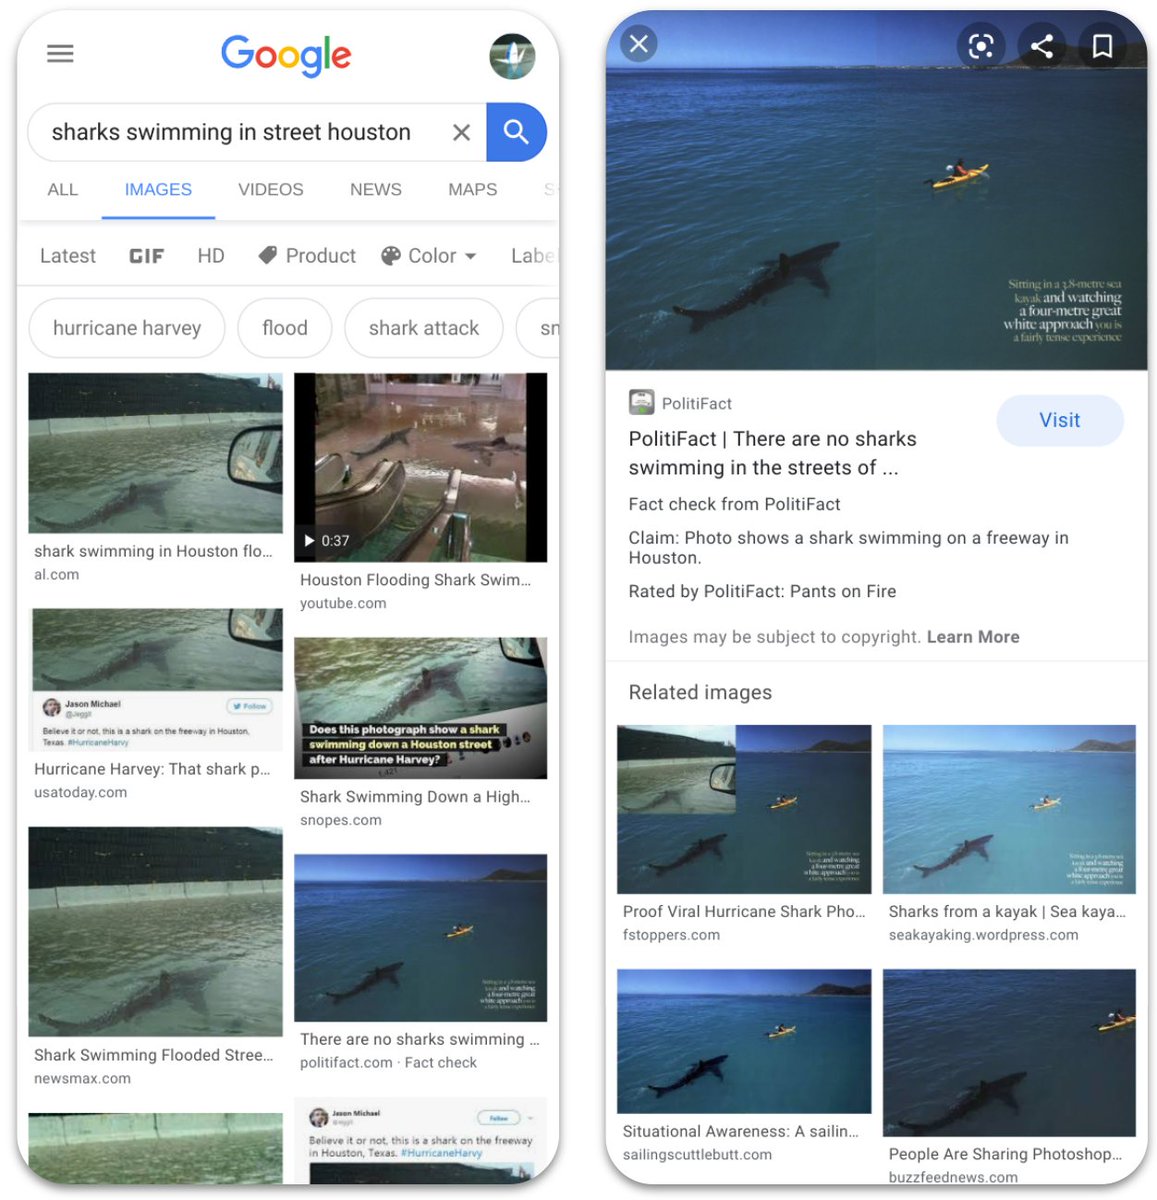 Just launched @  #GlobalFact7: fact checks in Google Images. Starting today, fact checks will show up with a small label and the Claim/Rating data in Google Images. Global roll-out should be complete within 48-72 hours.More at:  https://www.blog.google/products/search/bringing-fact-check-information-google-images